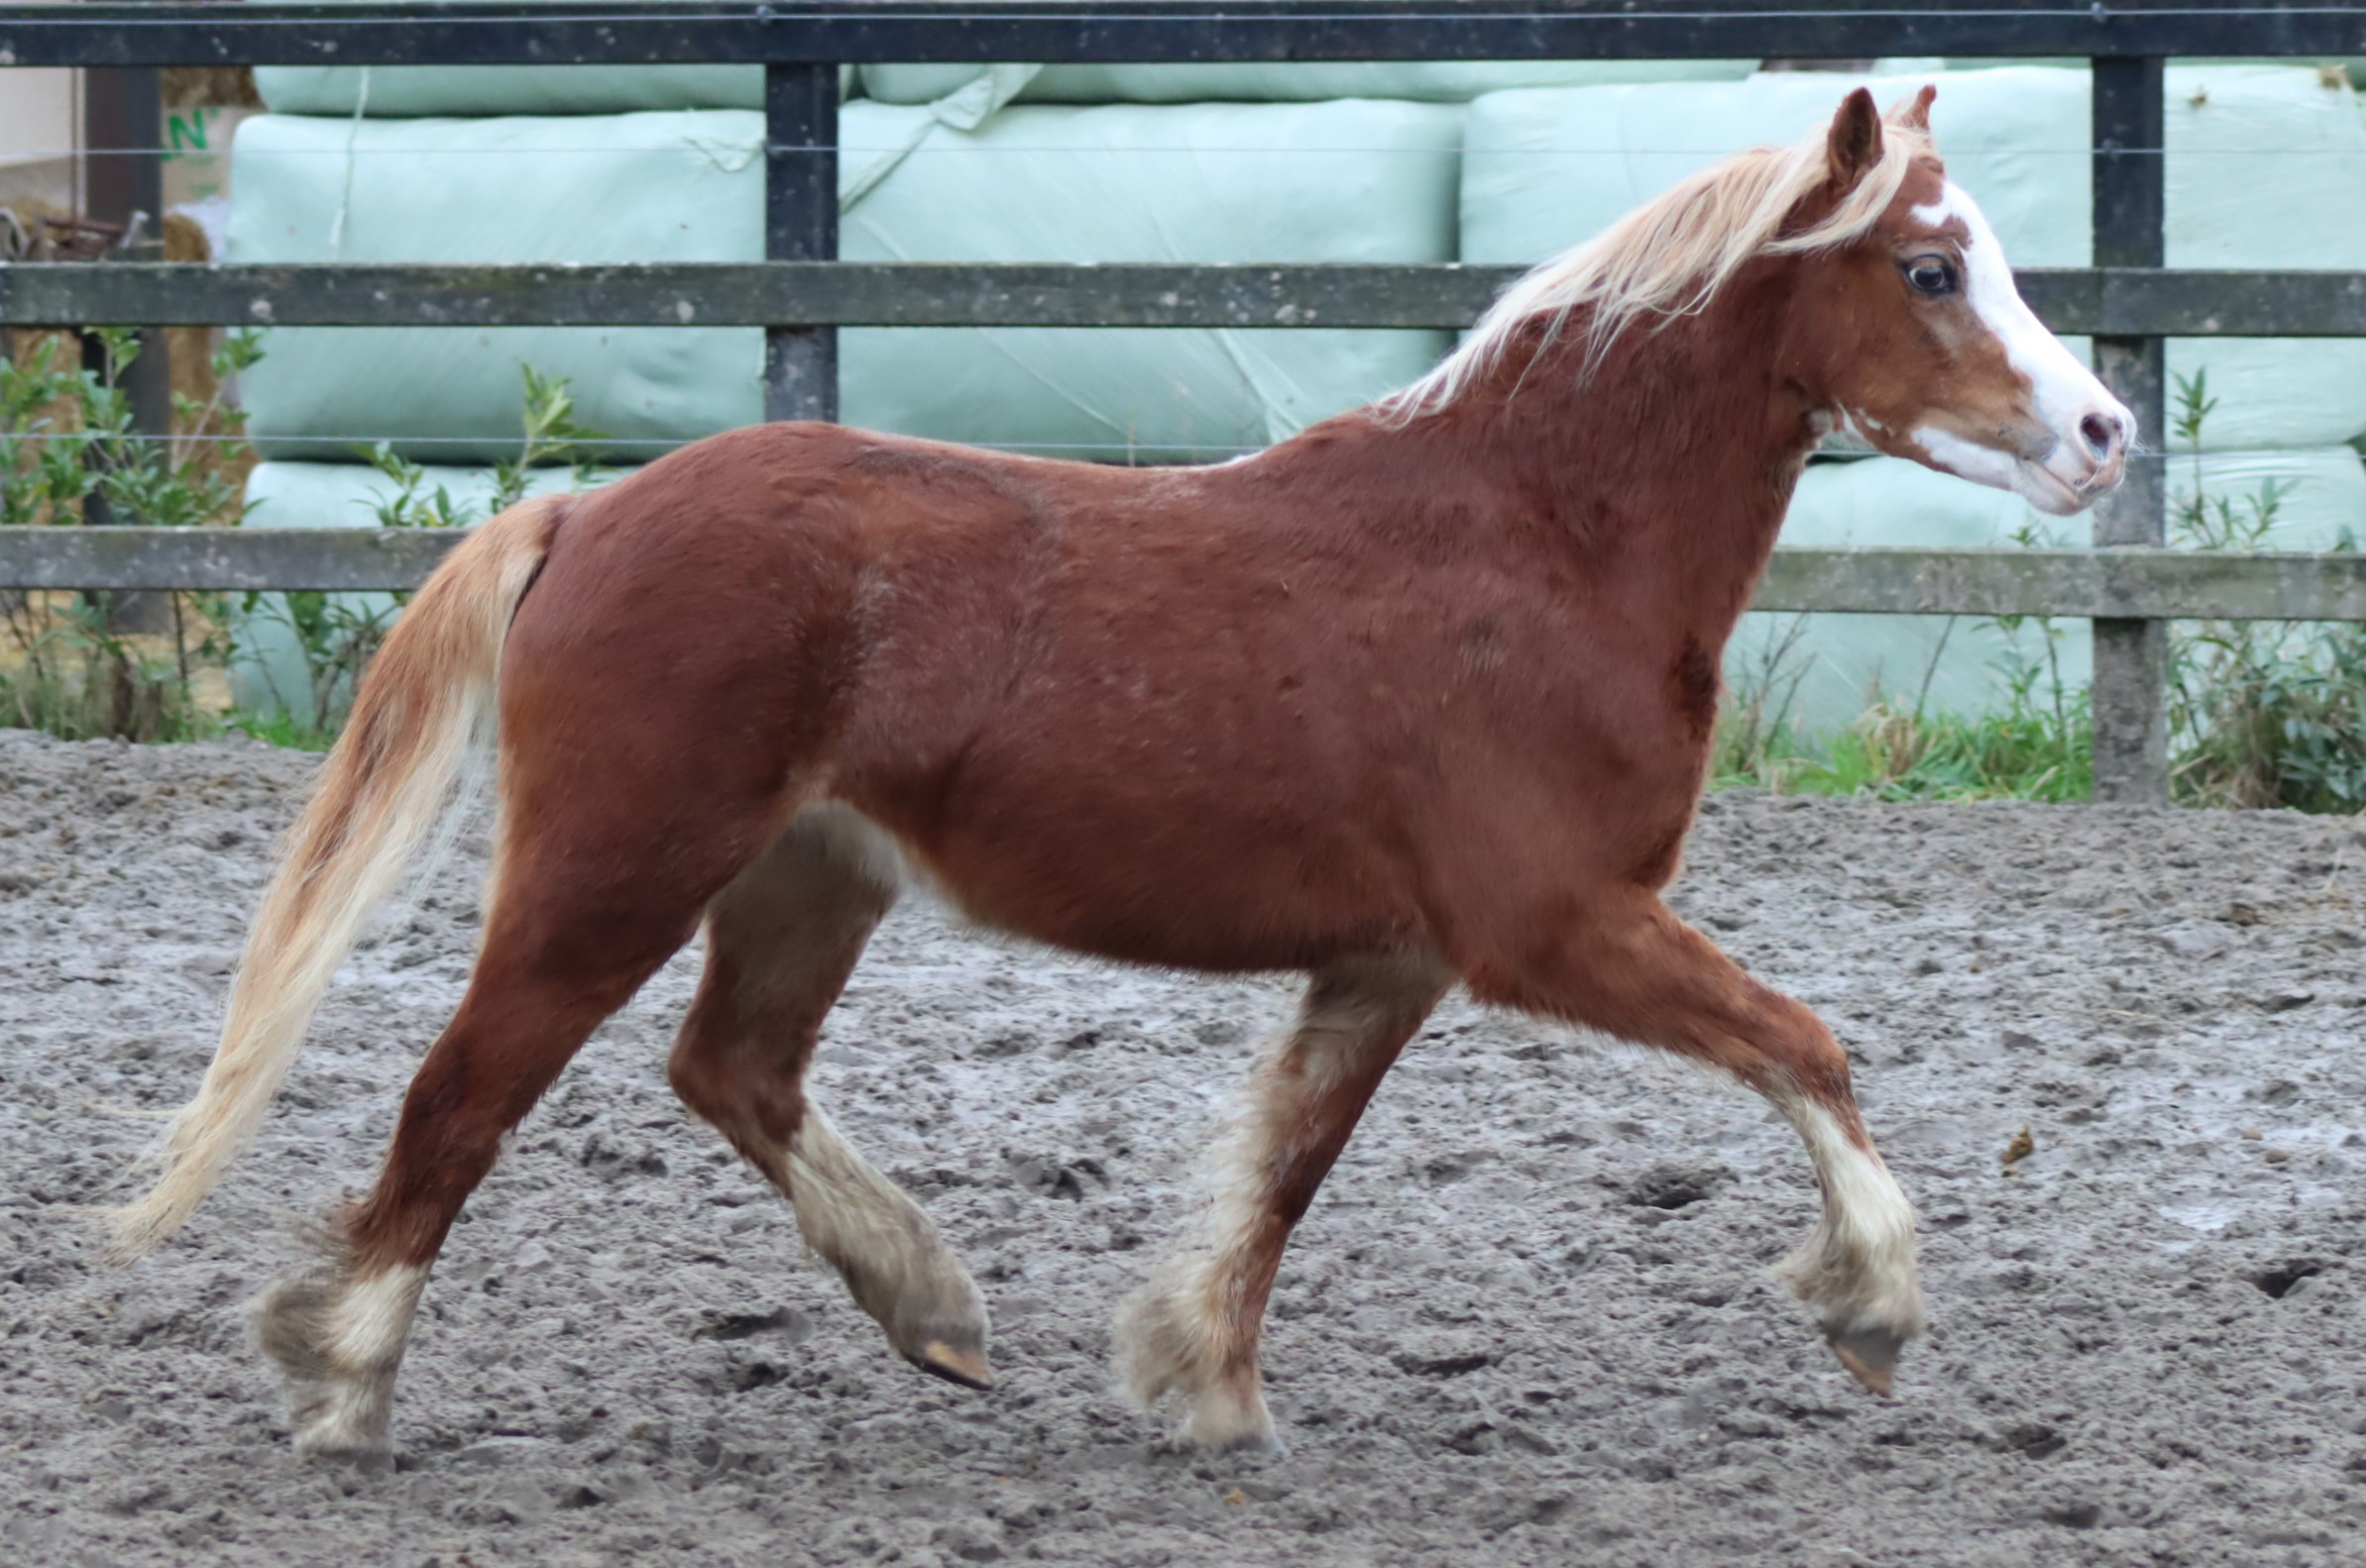 Mooie blonde vos Welsh sectie A merrie/ stunning blond Welsh section A filly